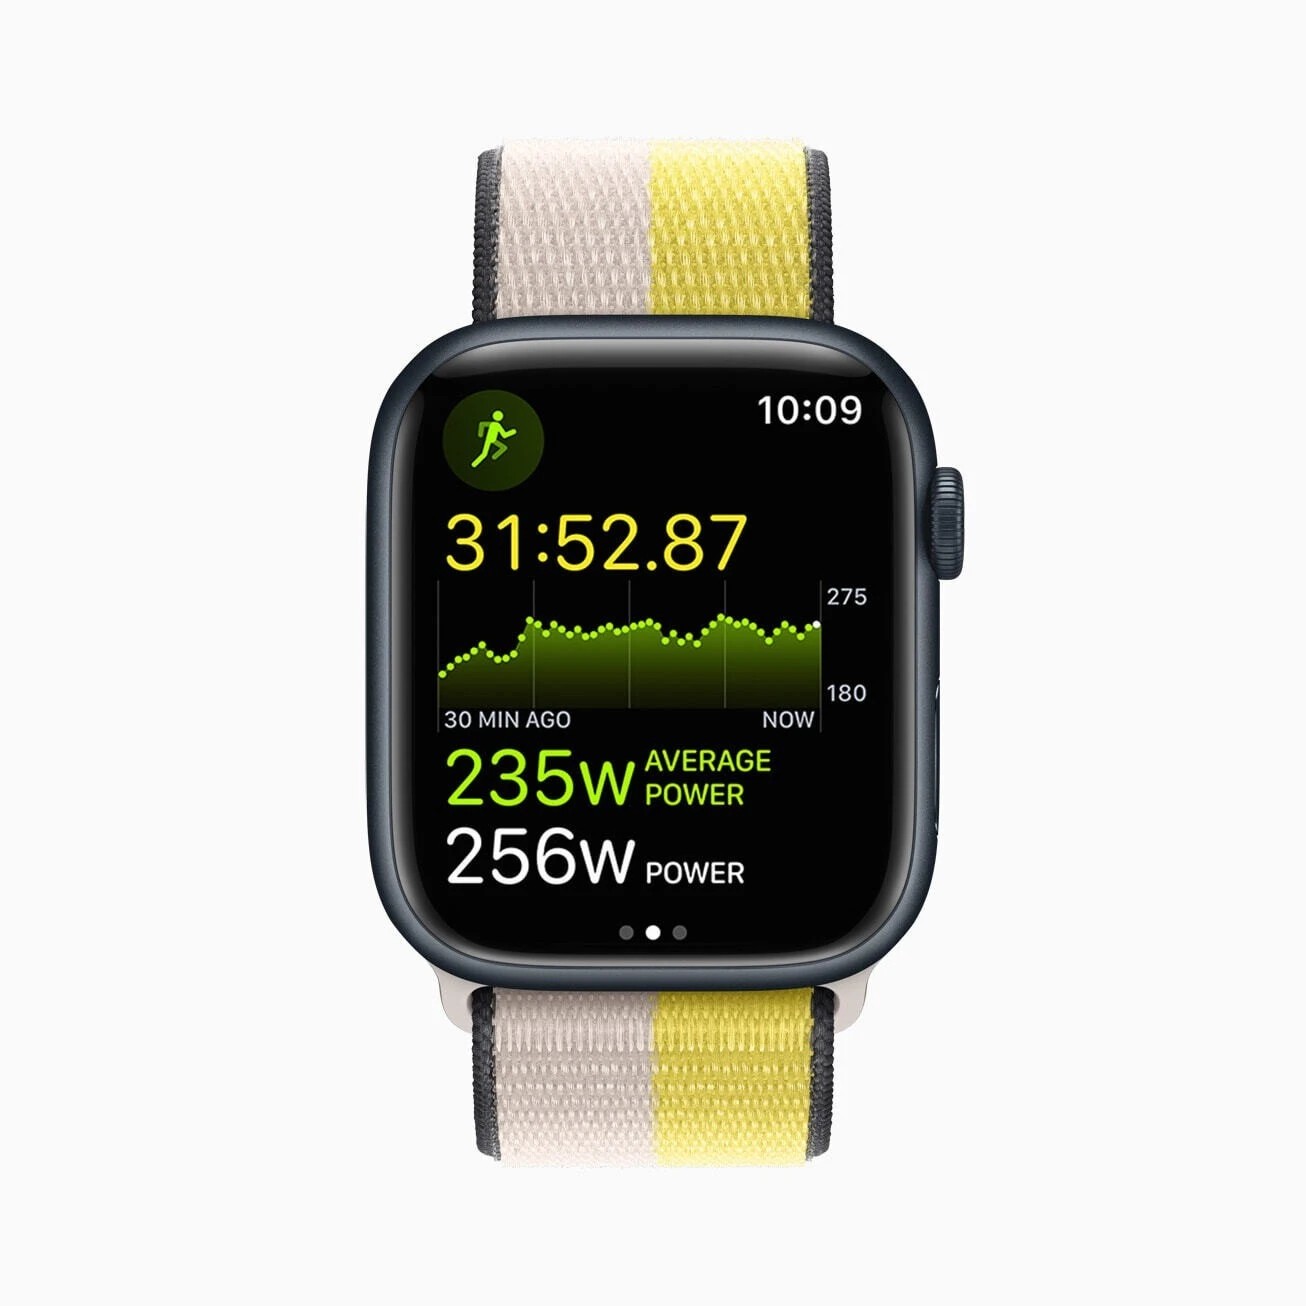 New watchOS 9.2 beta includes running training route function for athletes
